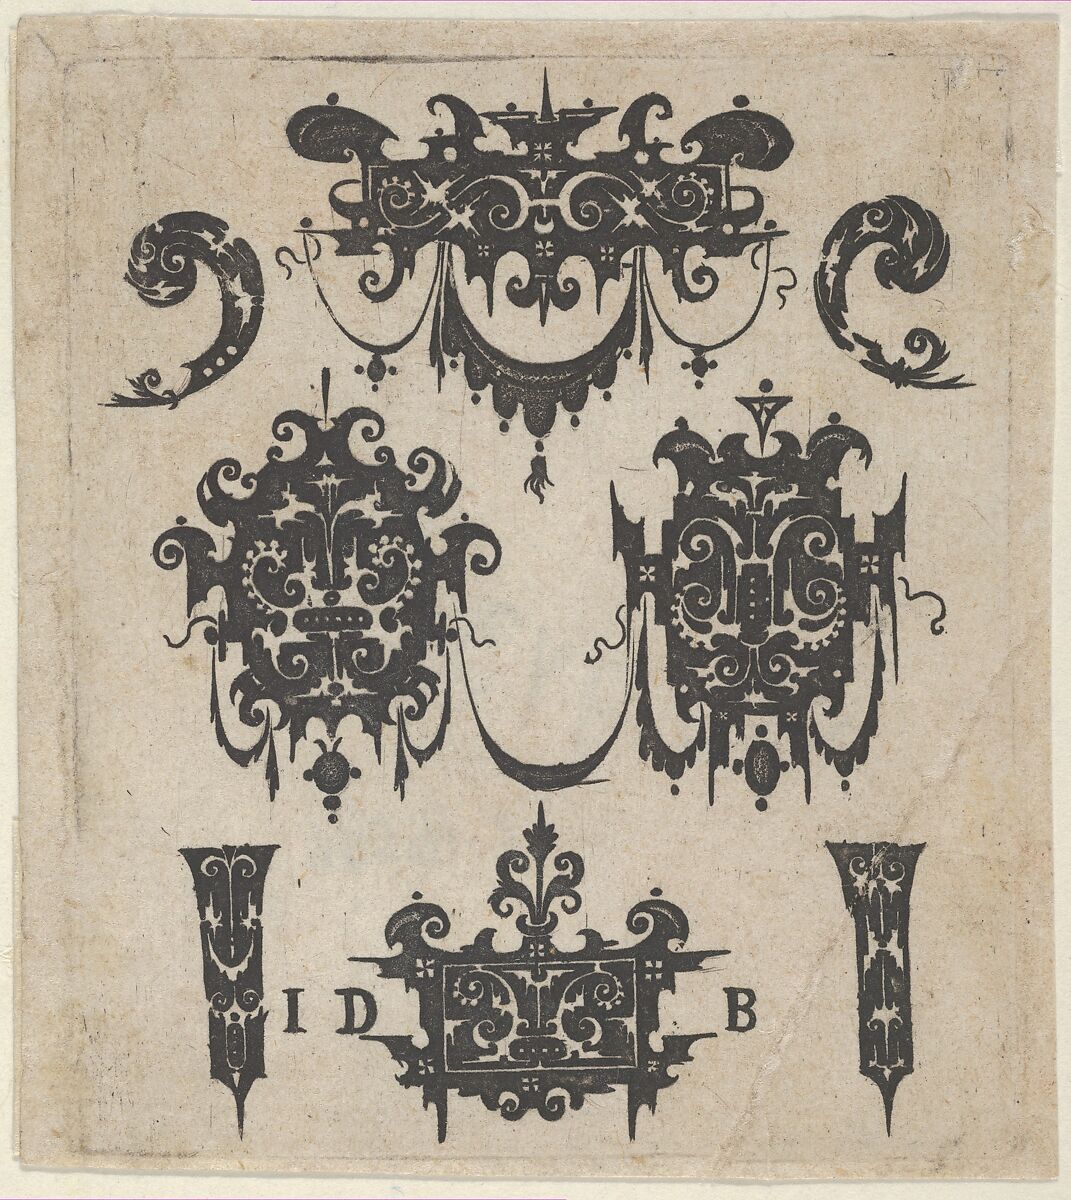 Blackwork Print with Four Shweifwerk Motifs Decorated with Swag Combined with Four Small Fillets, Hans de Bull (German, active 1592–1604), Blackwork engraving 